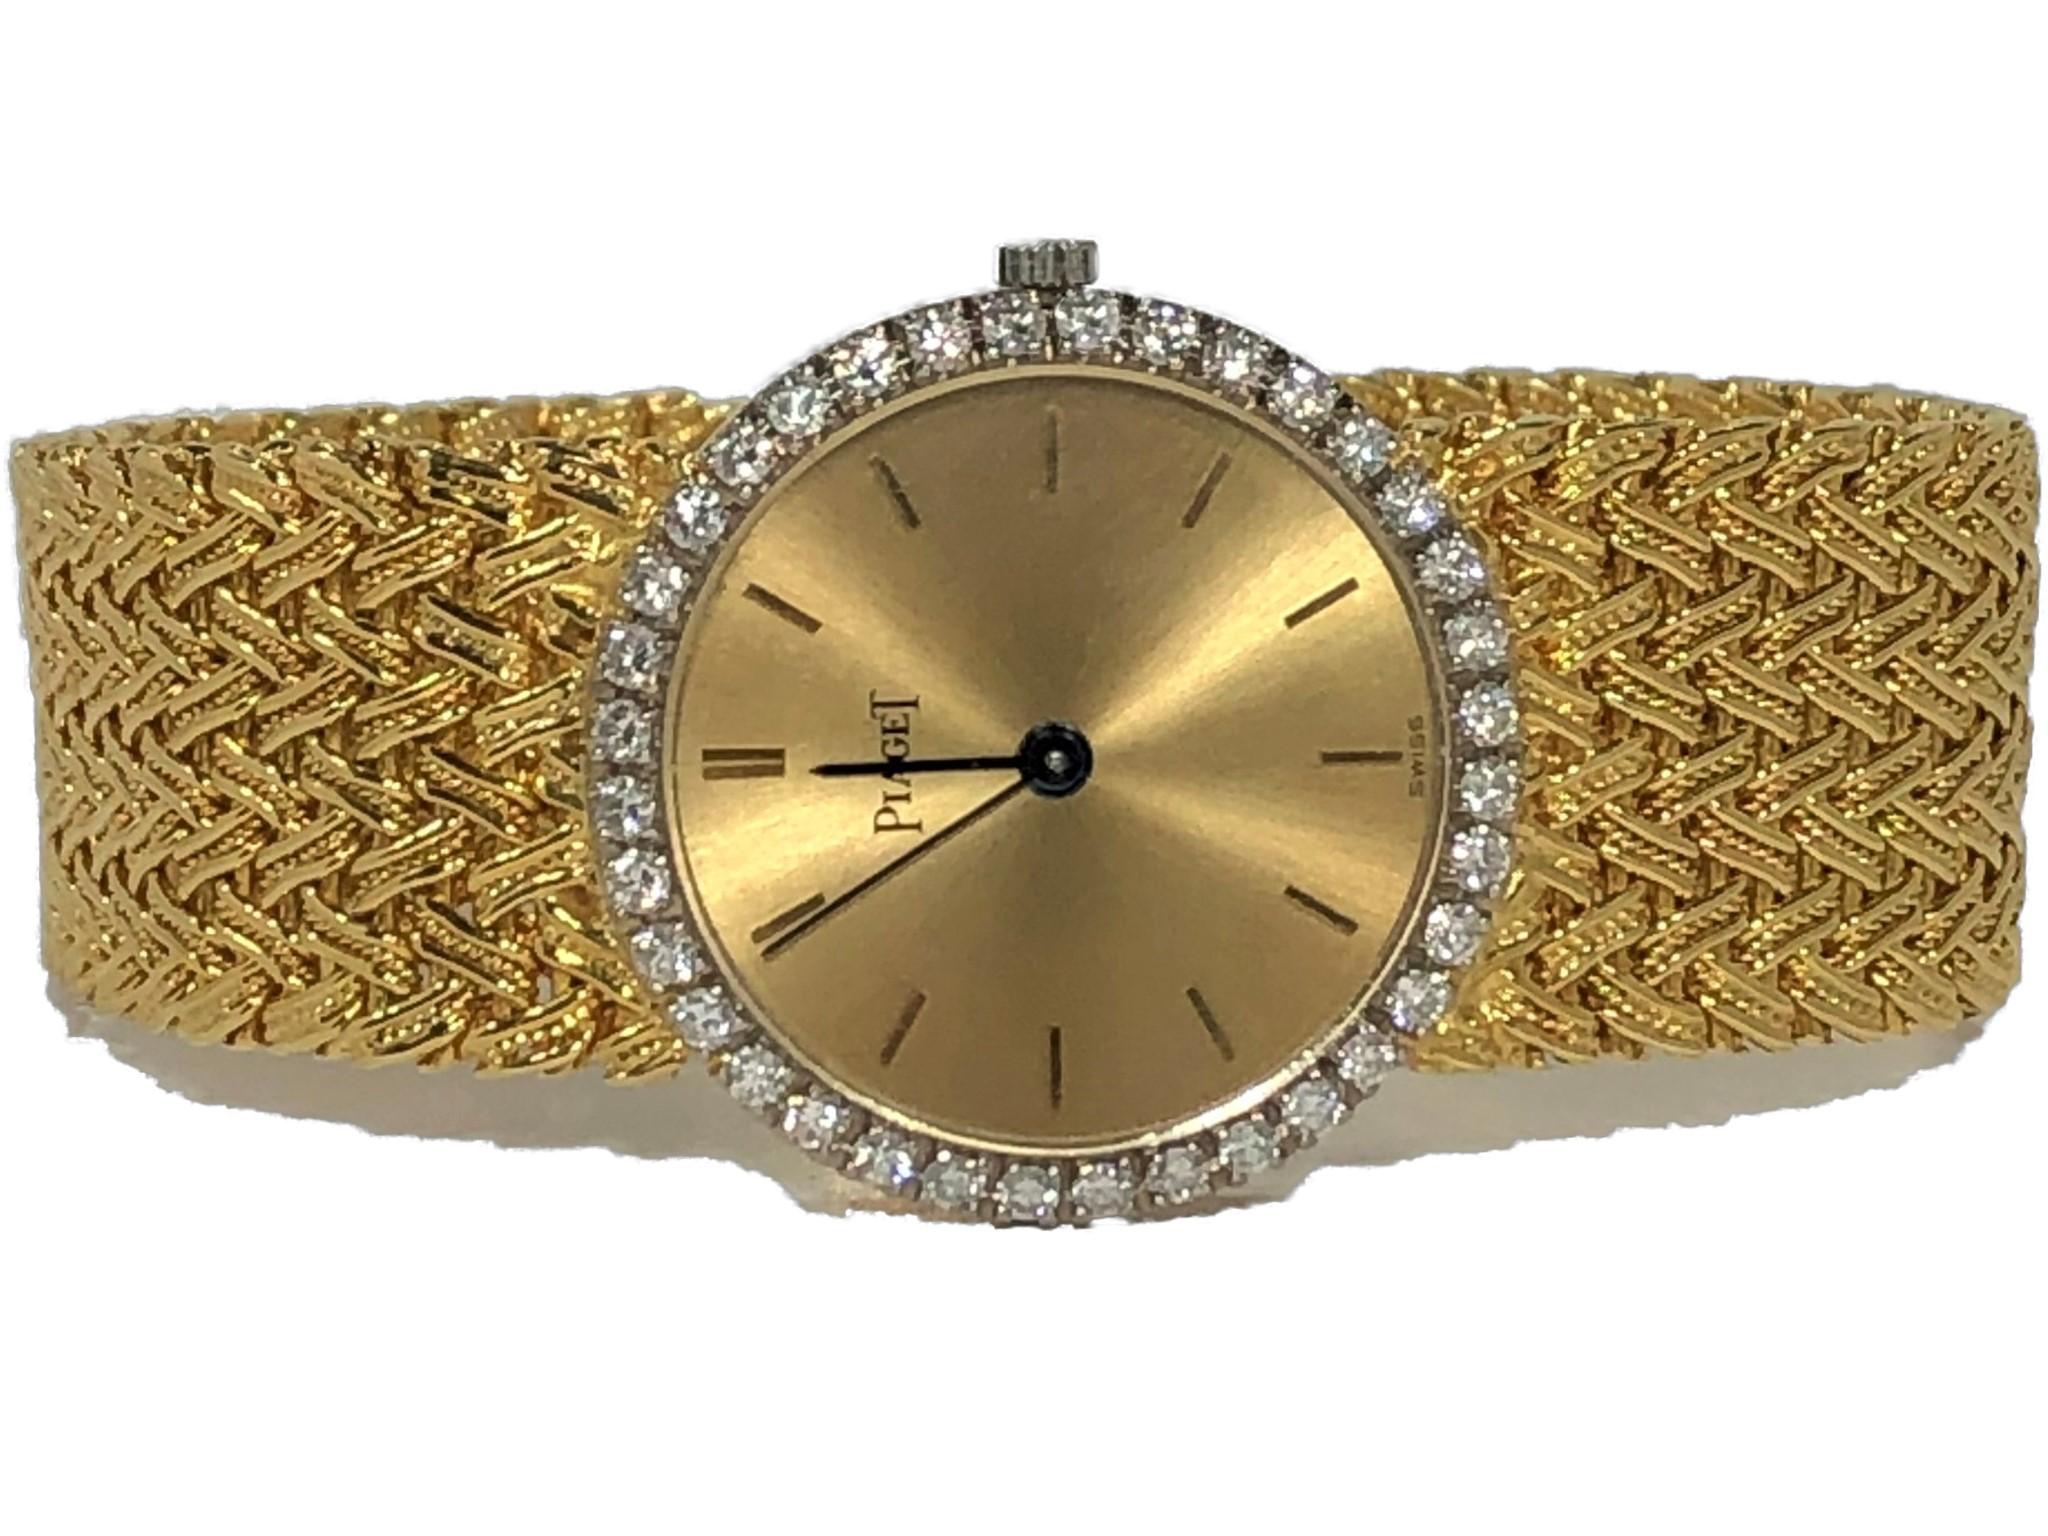 A ladies 18K yellow gold wristwatch by Piaget with a diamond bezel measuring 24mm in diameter. Centered around a champagne color dial with gold, stick markers, the black hands and logo contrast beautifully, and are easy to read. The diamonds weigh a